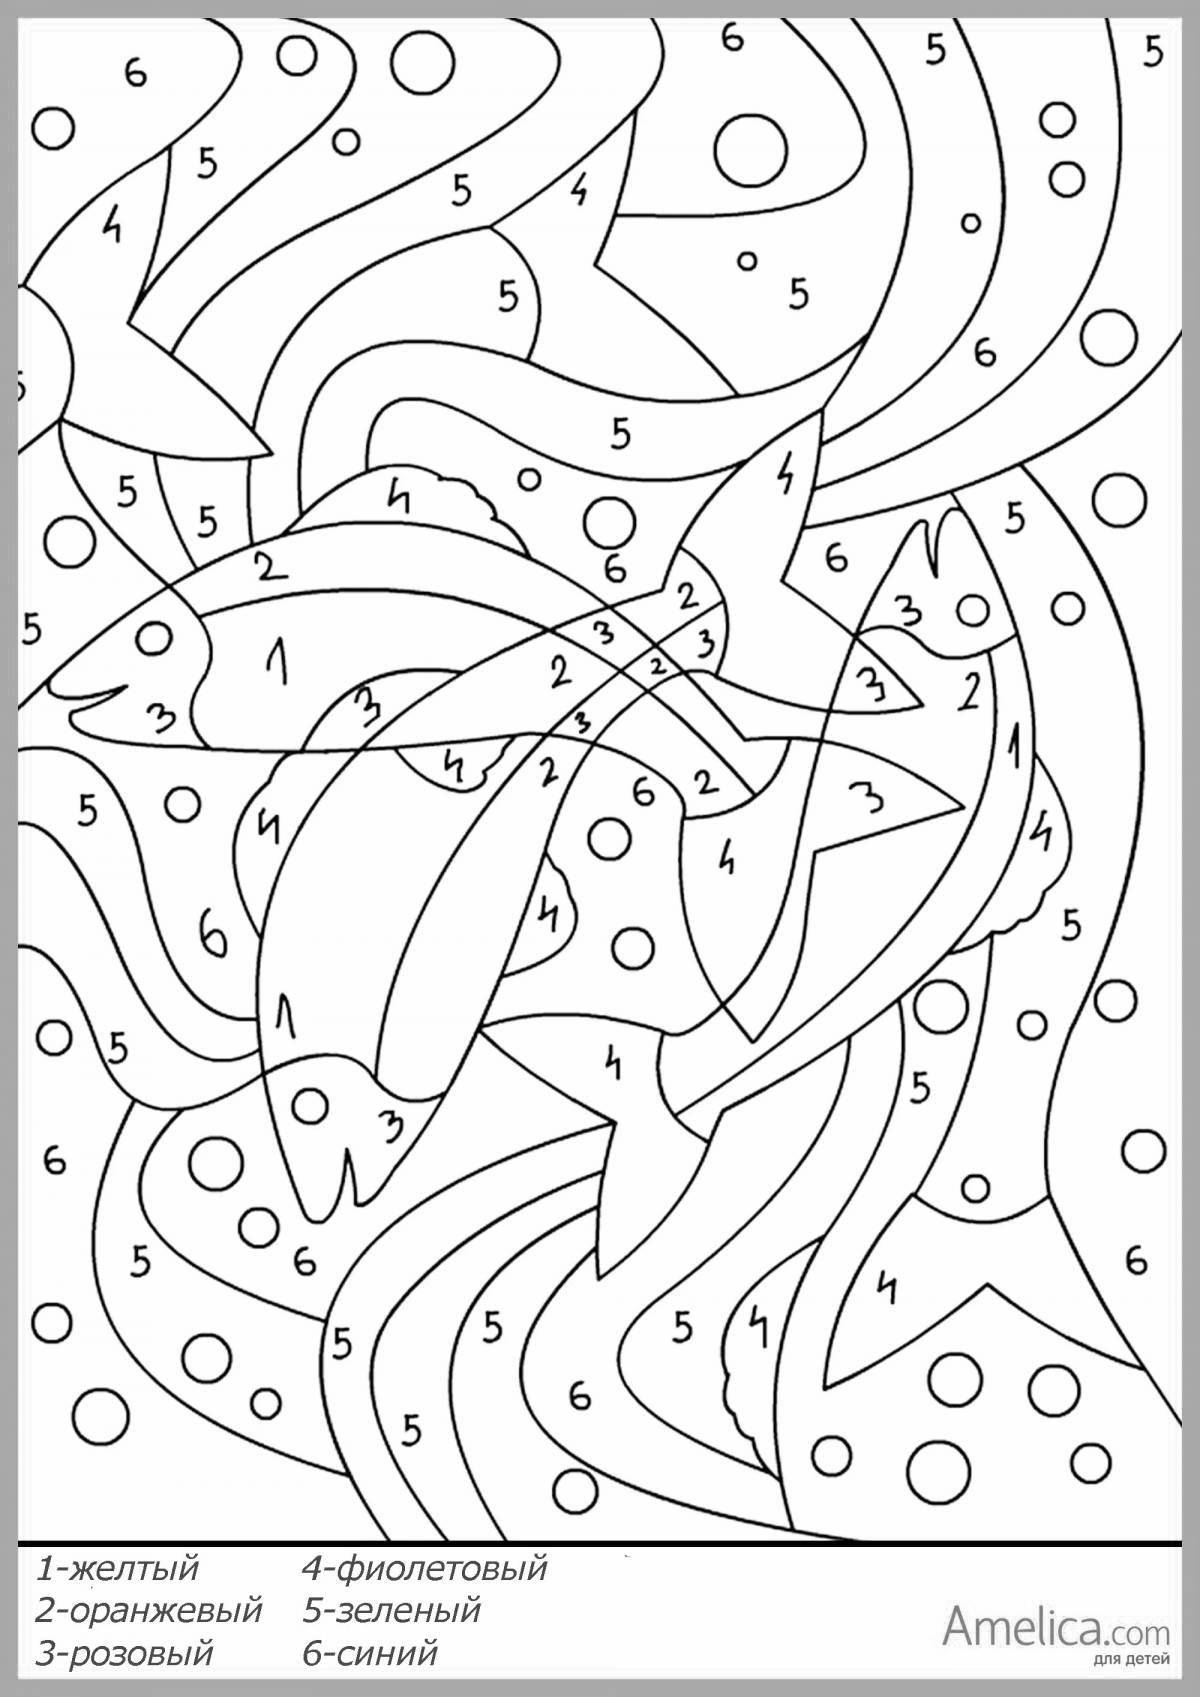 Amazing coloring book for kids with colored numbers